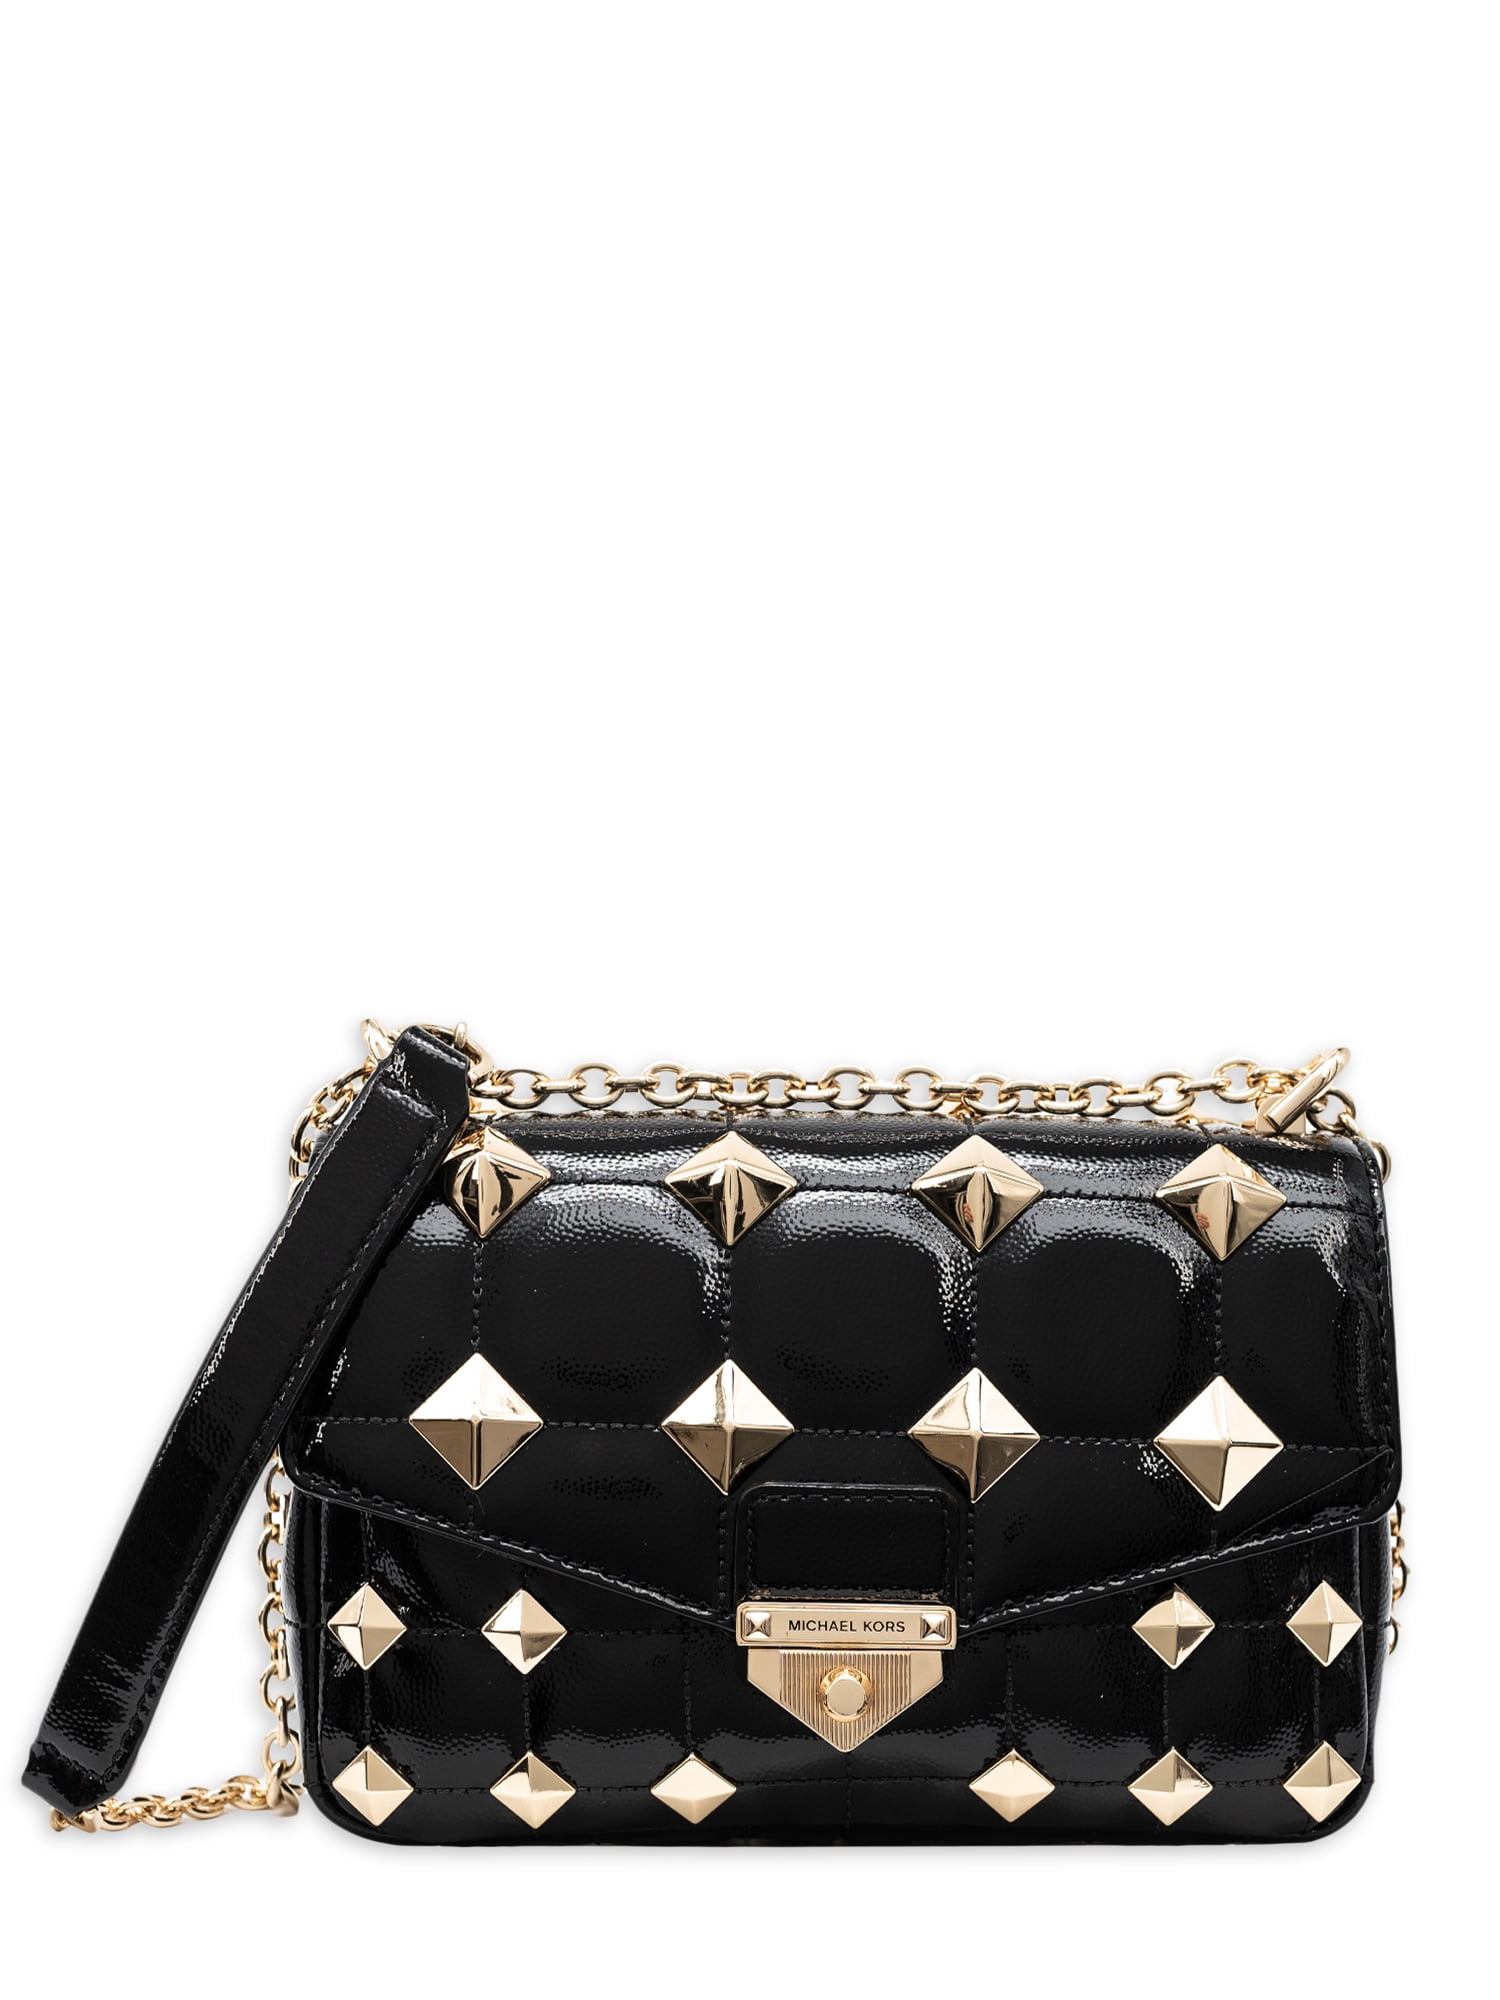 What Fits in my Michael Kors Soho Small Quilted Leather Shoulder